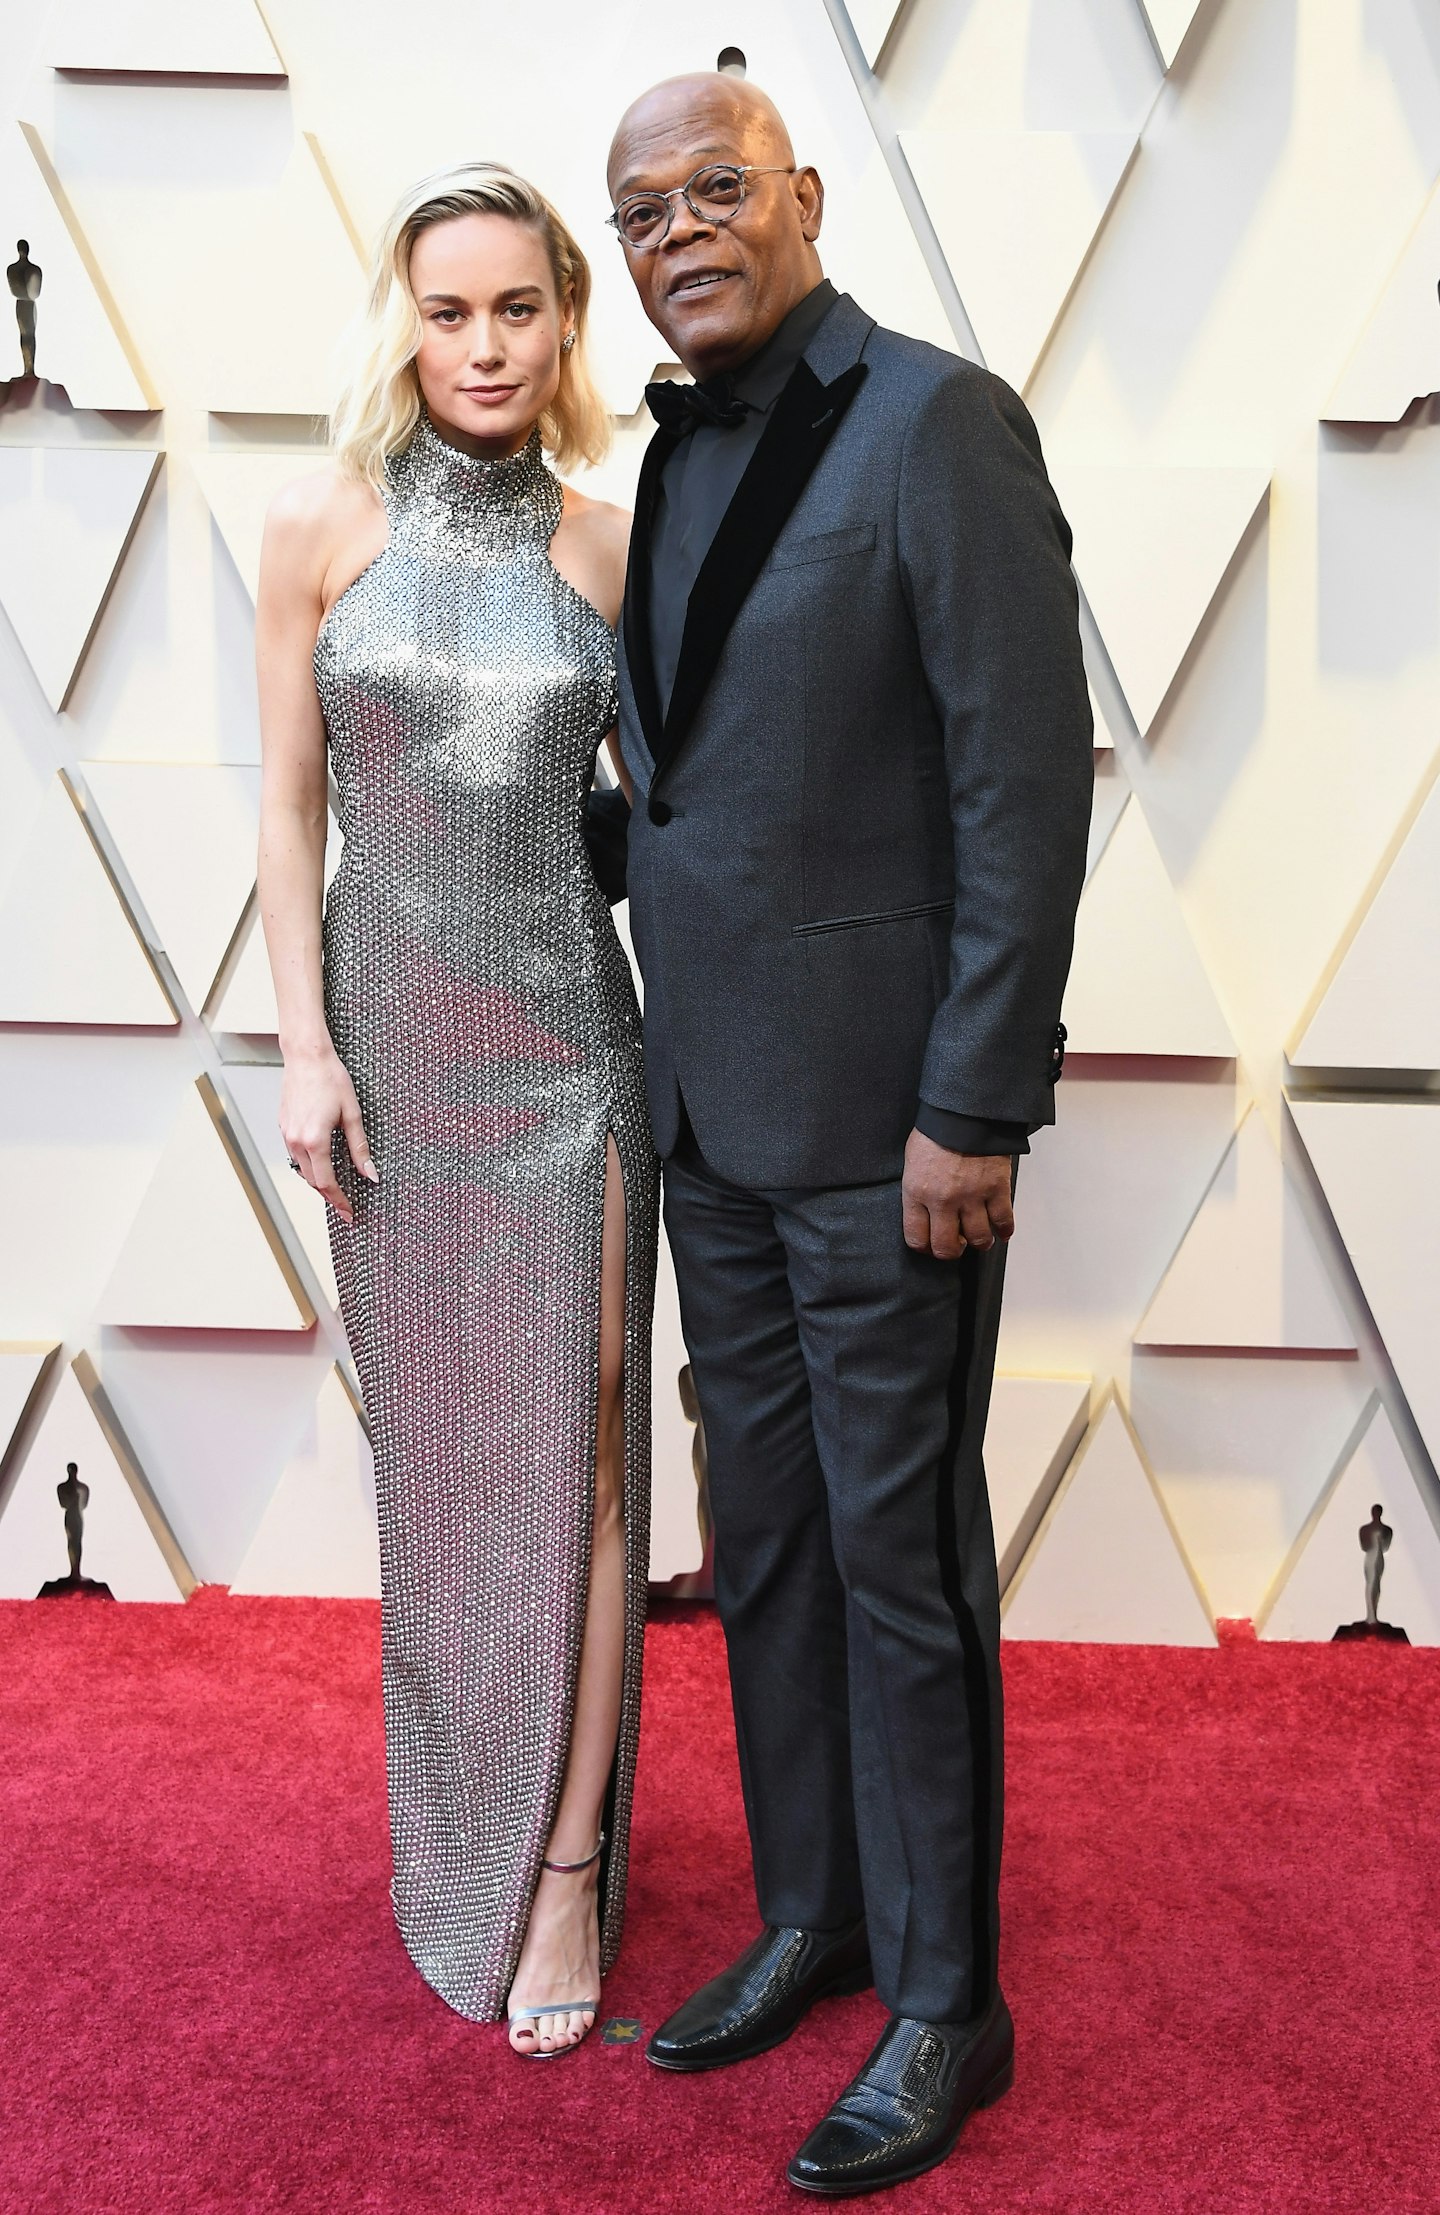 Brie Larson and Samuel L. Jackson at the 2019 Oscars